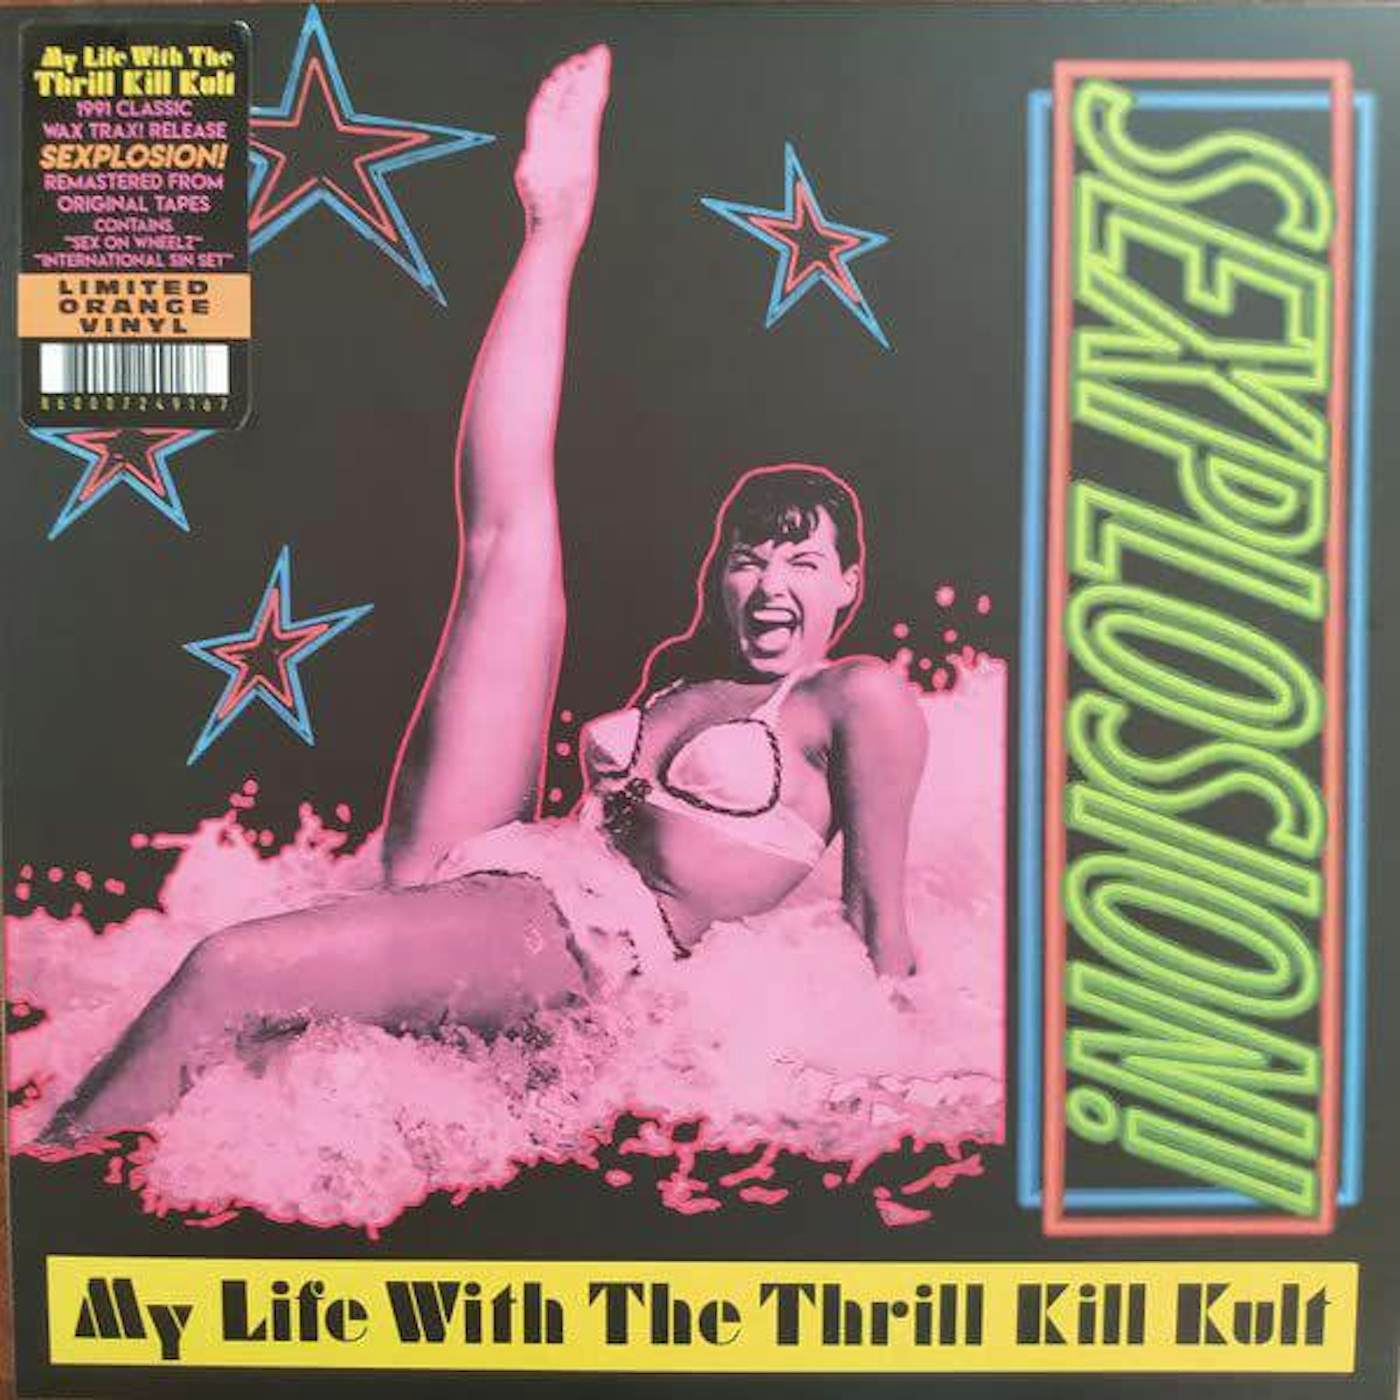 My Life With The Thrill Kill Kult Sexplosion! (2lp/reissue/Pink) Vinyl Record